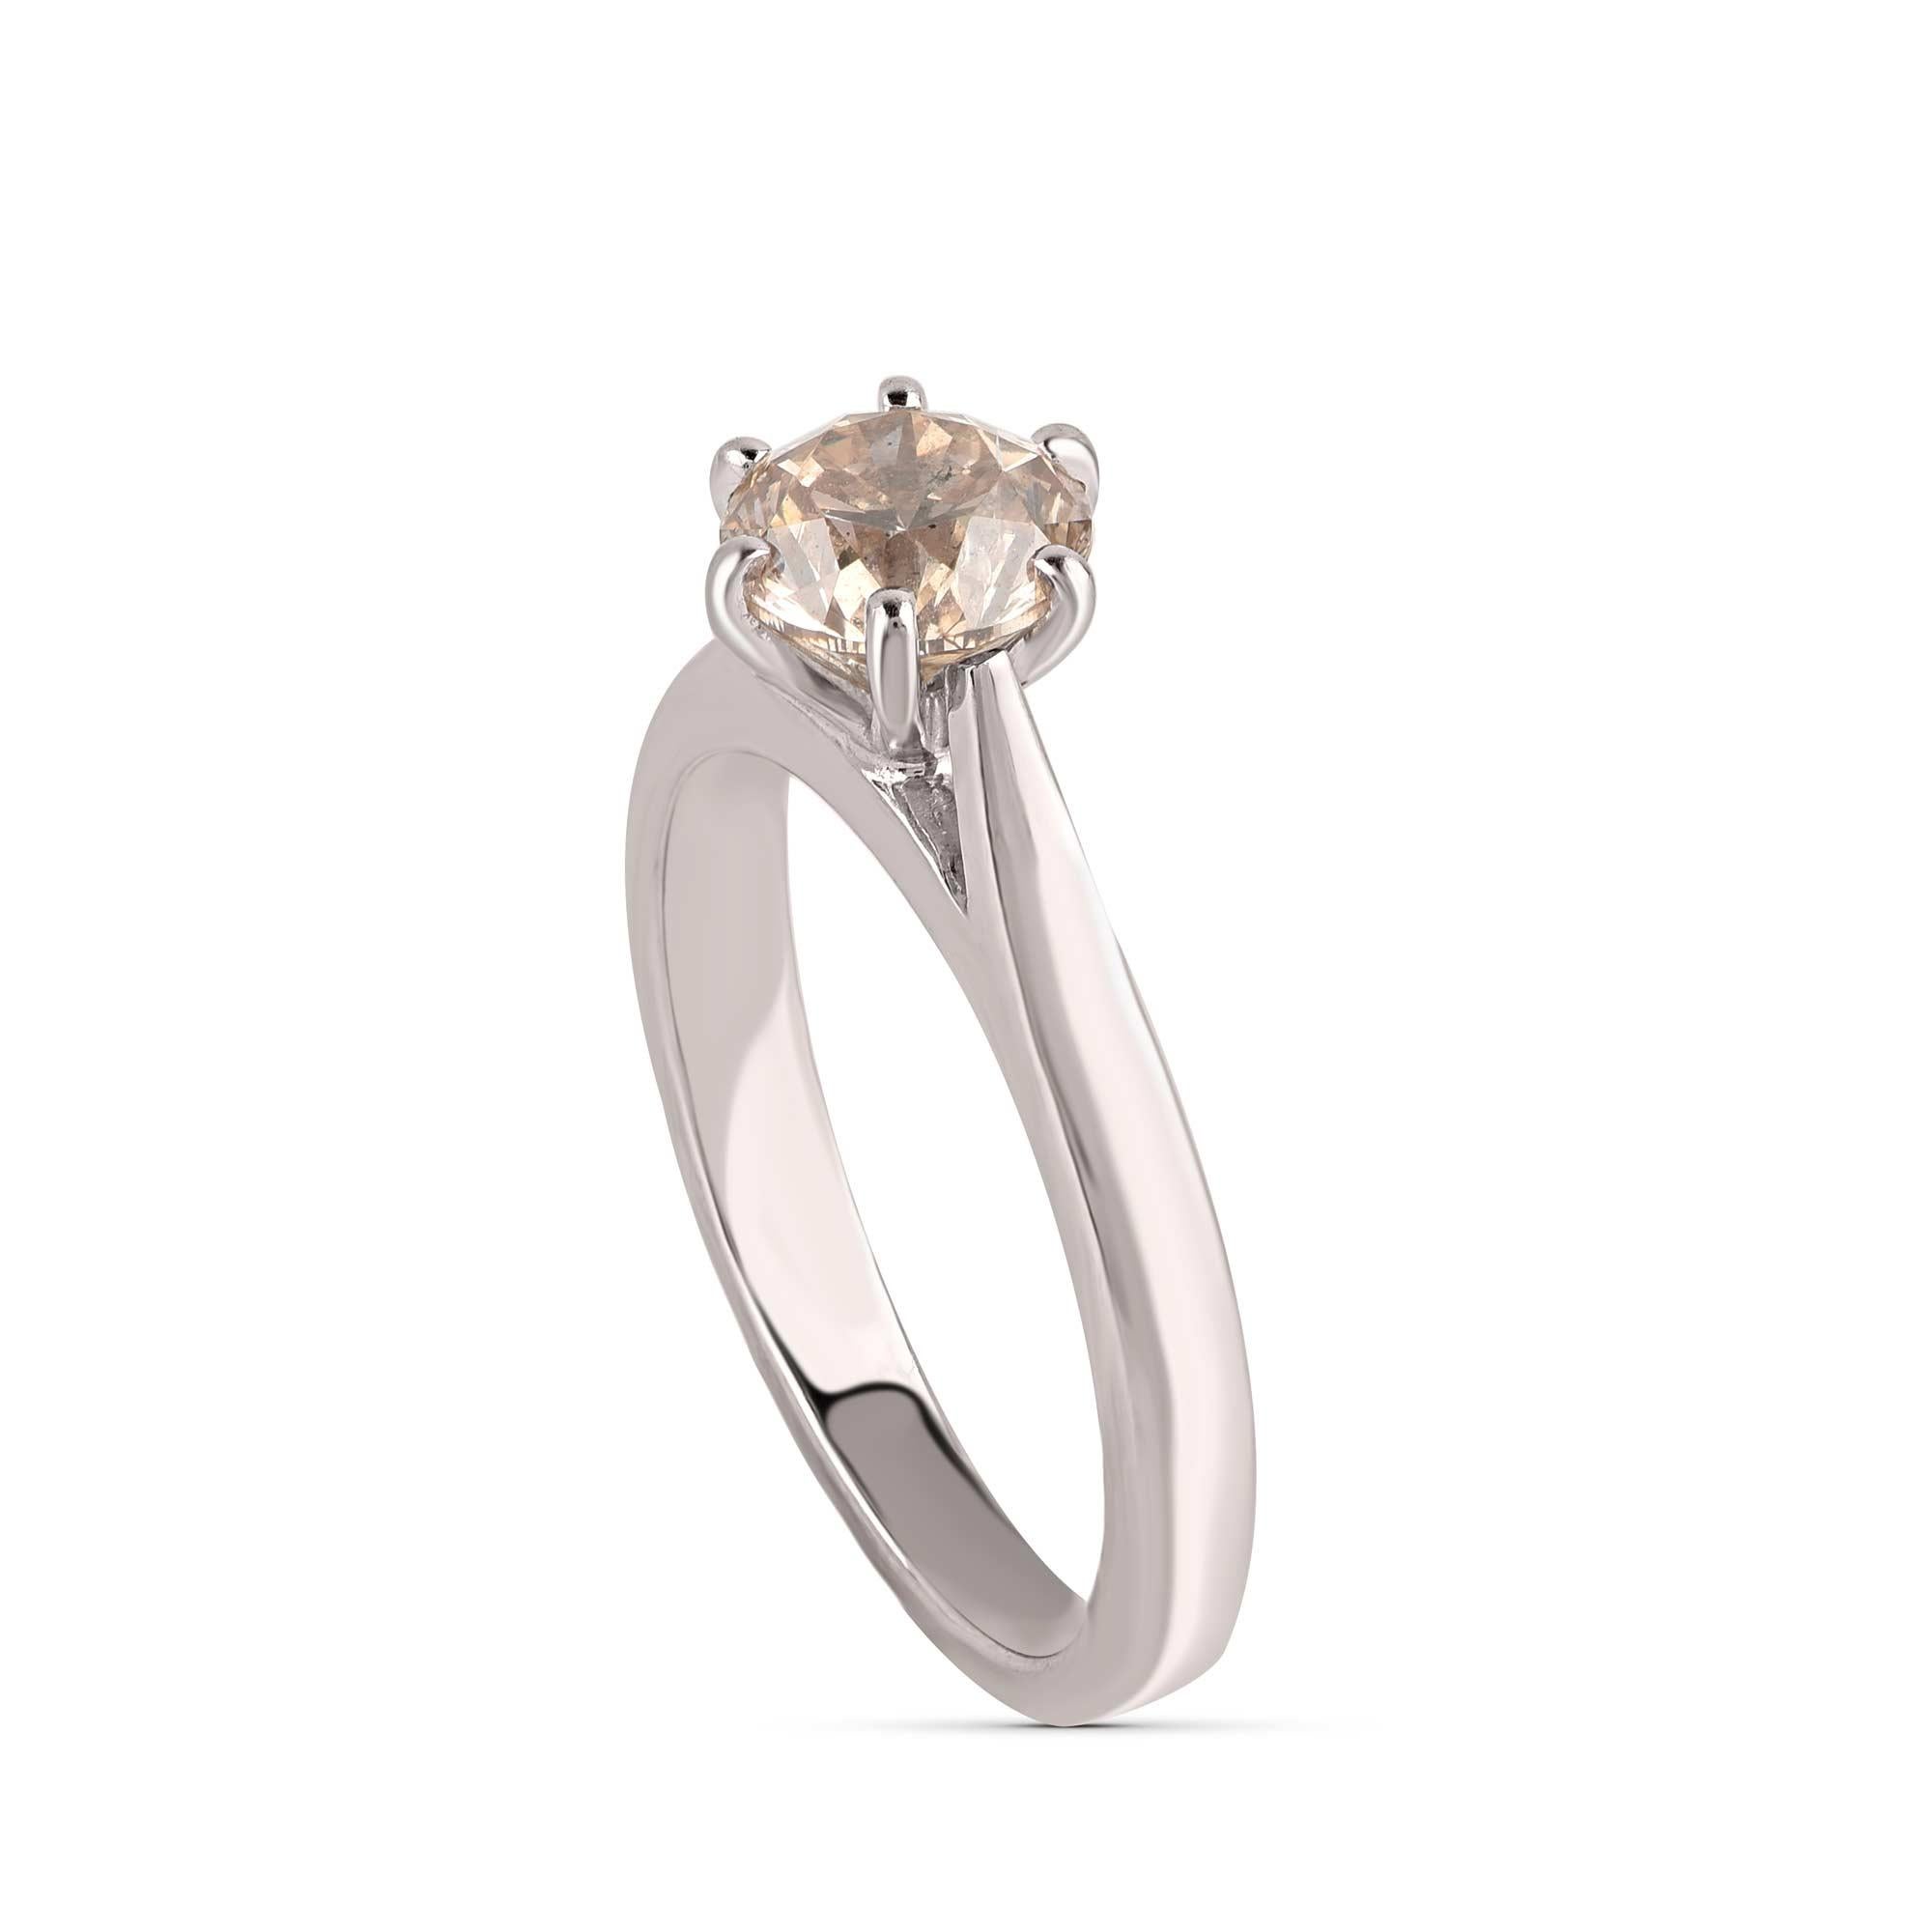 1 ct diamond solitaire engagement ring in 14k white gold